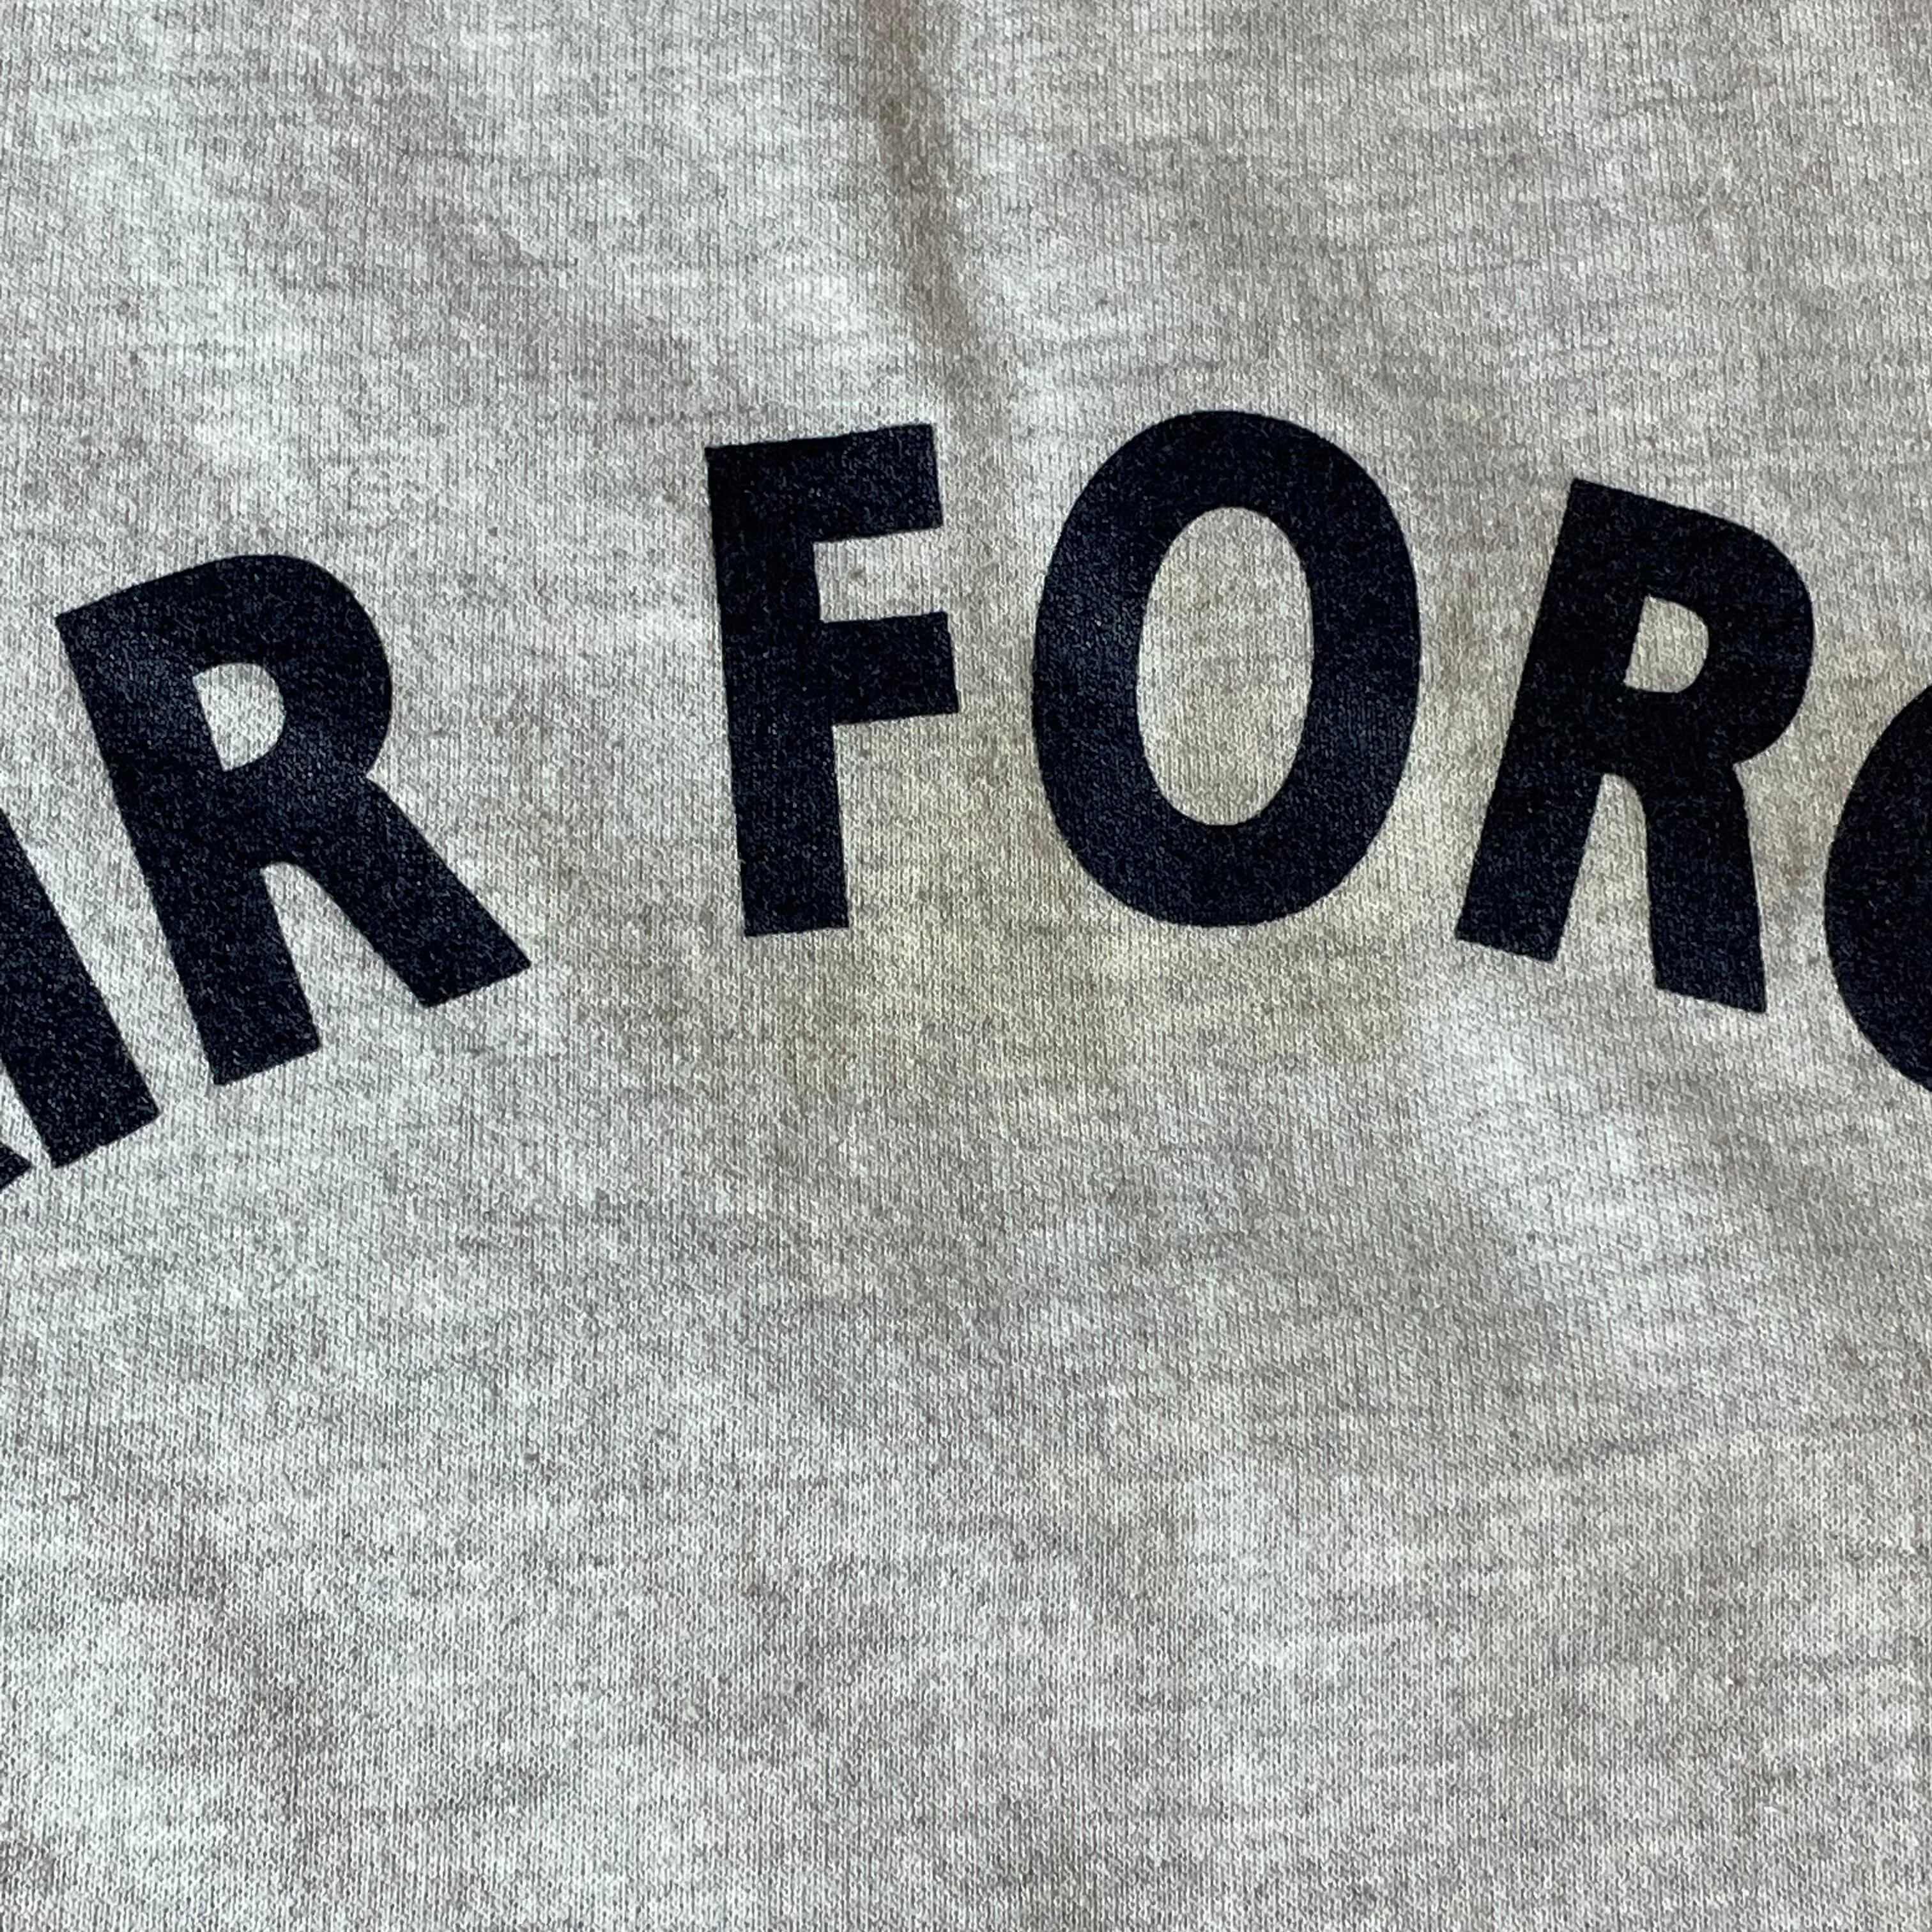 90s JERZEES AIR FORCE スウェット染み込み | used&vintage aoakua